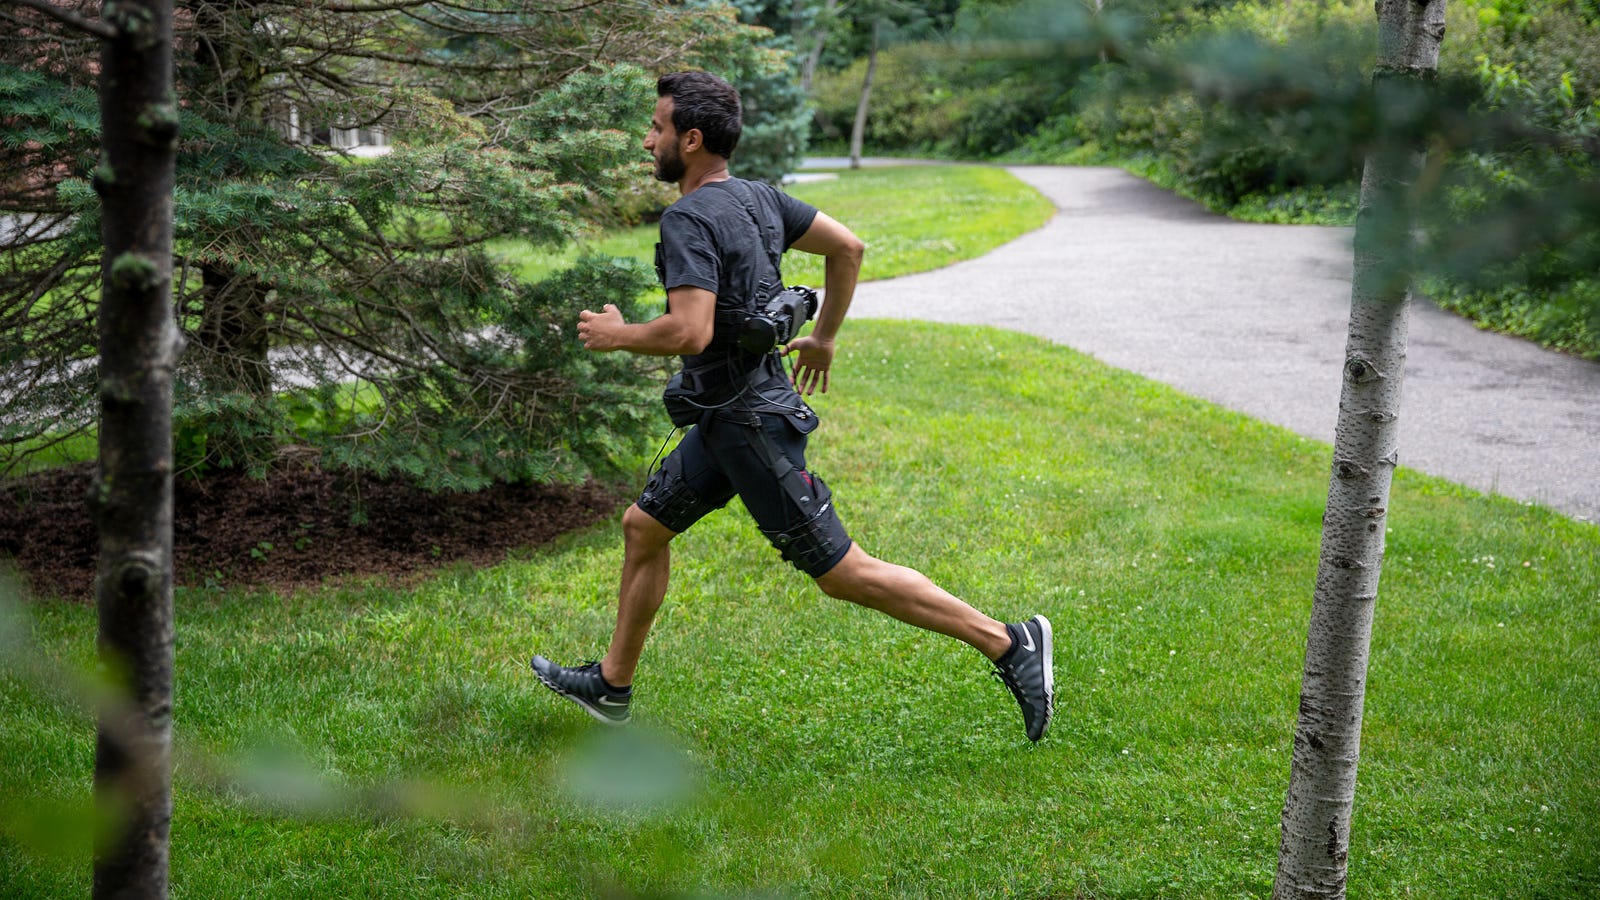 These Robotic Shorts Make Walking and Running Easier